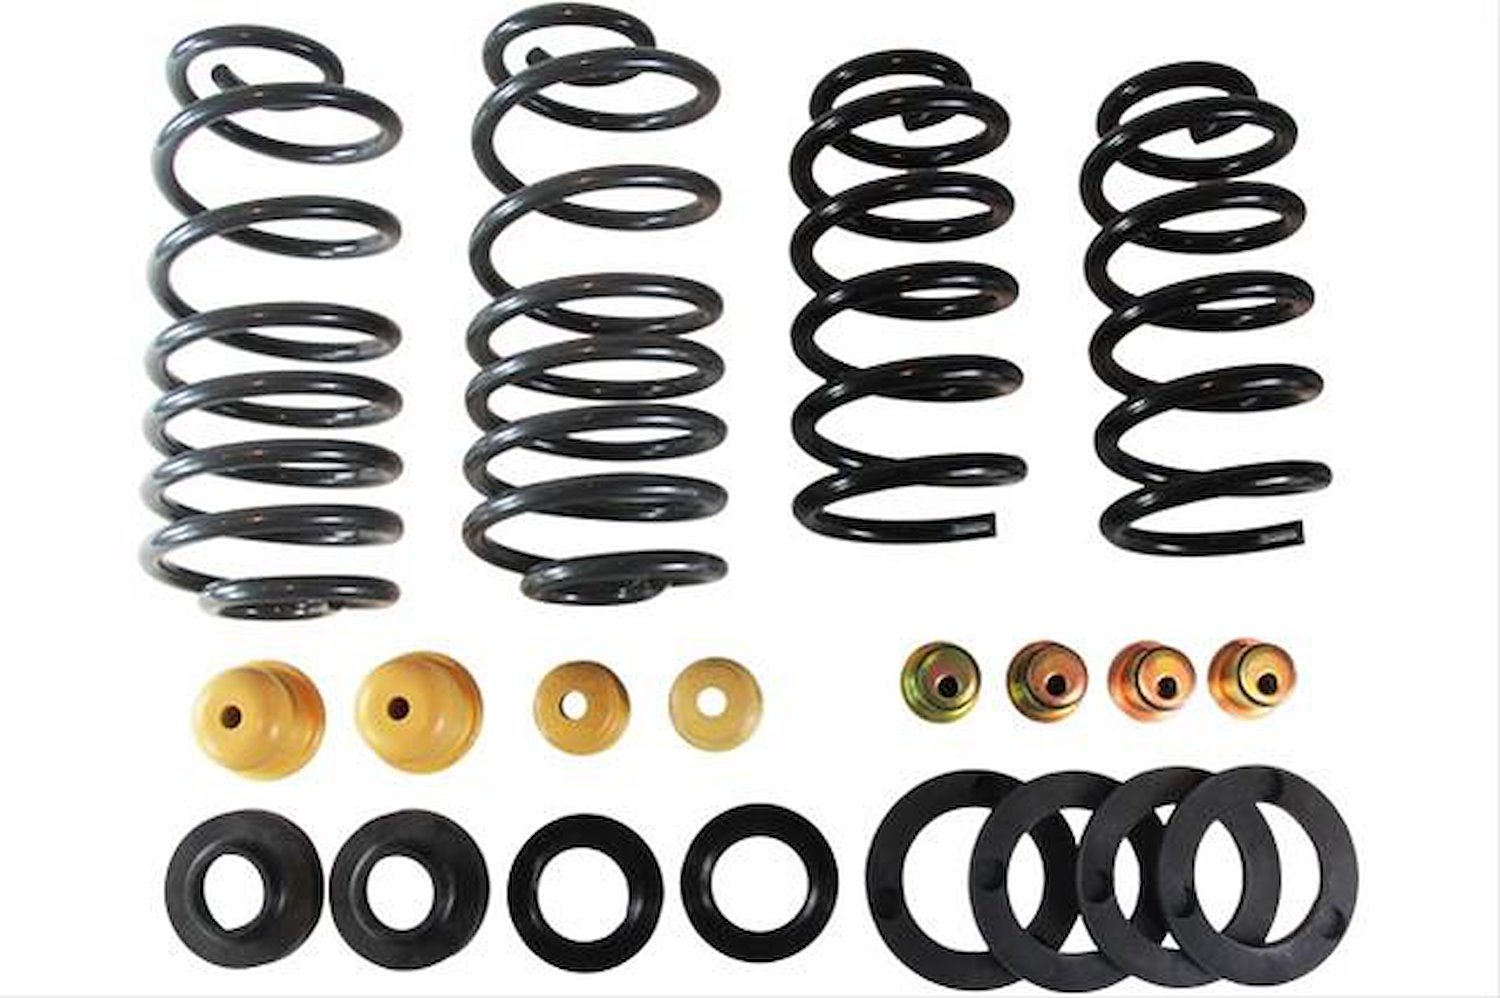 Complete Lowering Kit for 2015-Up Chevy Tahoe/GMC Yukon/Cadillac